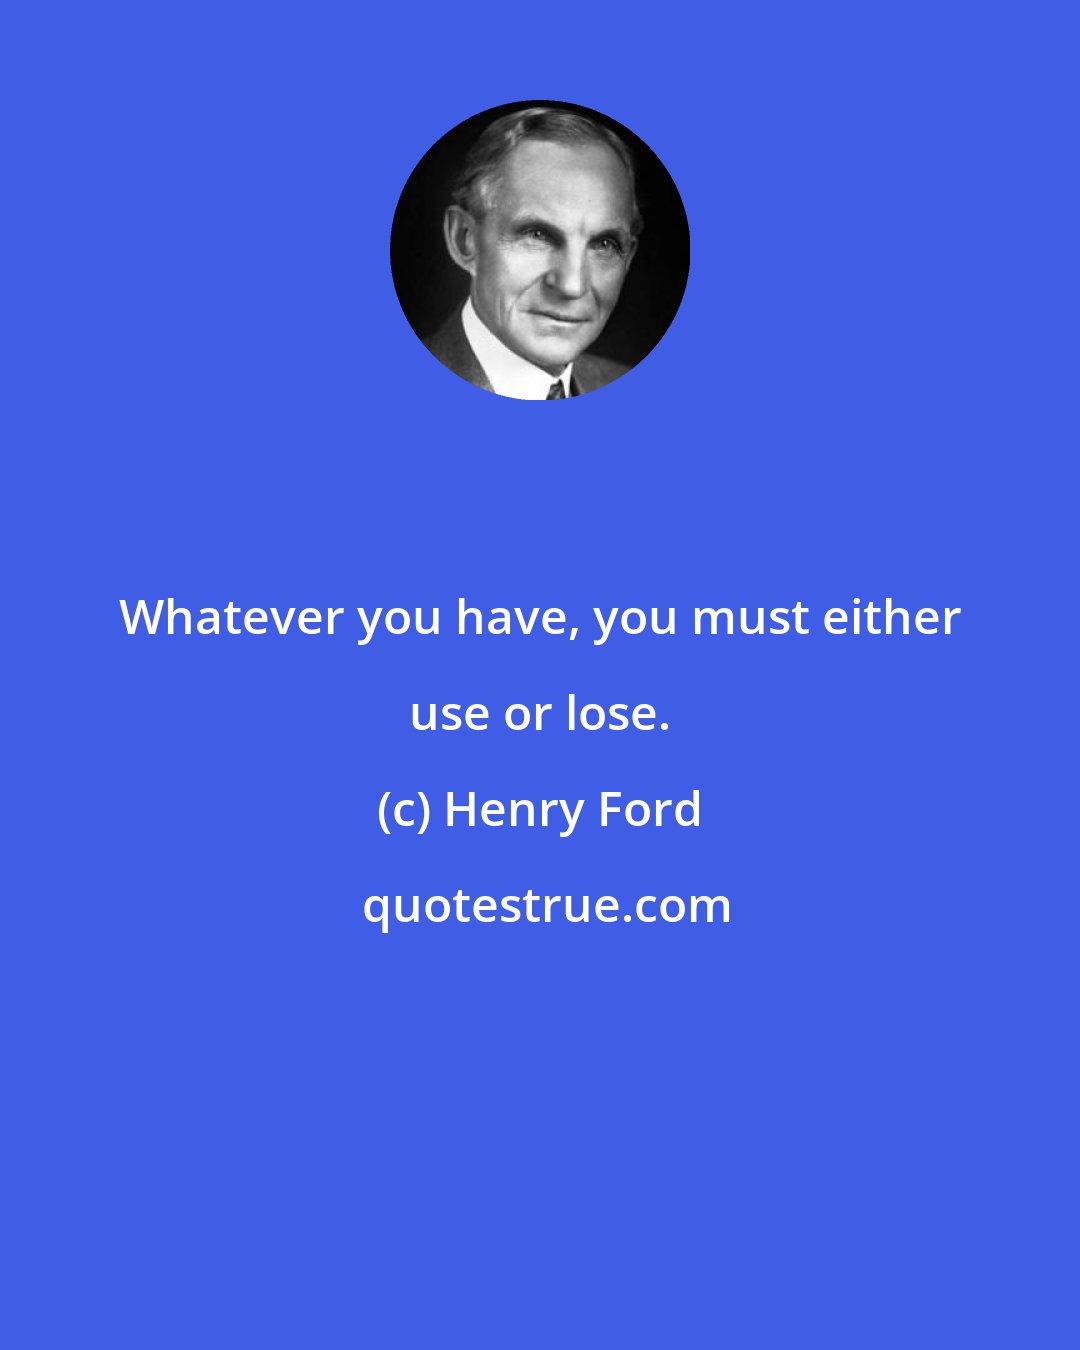 Henry Ford: Whatever you have, you must either use or lose.